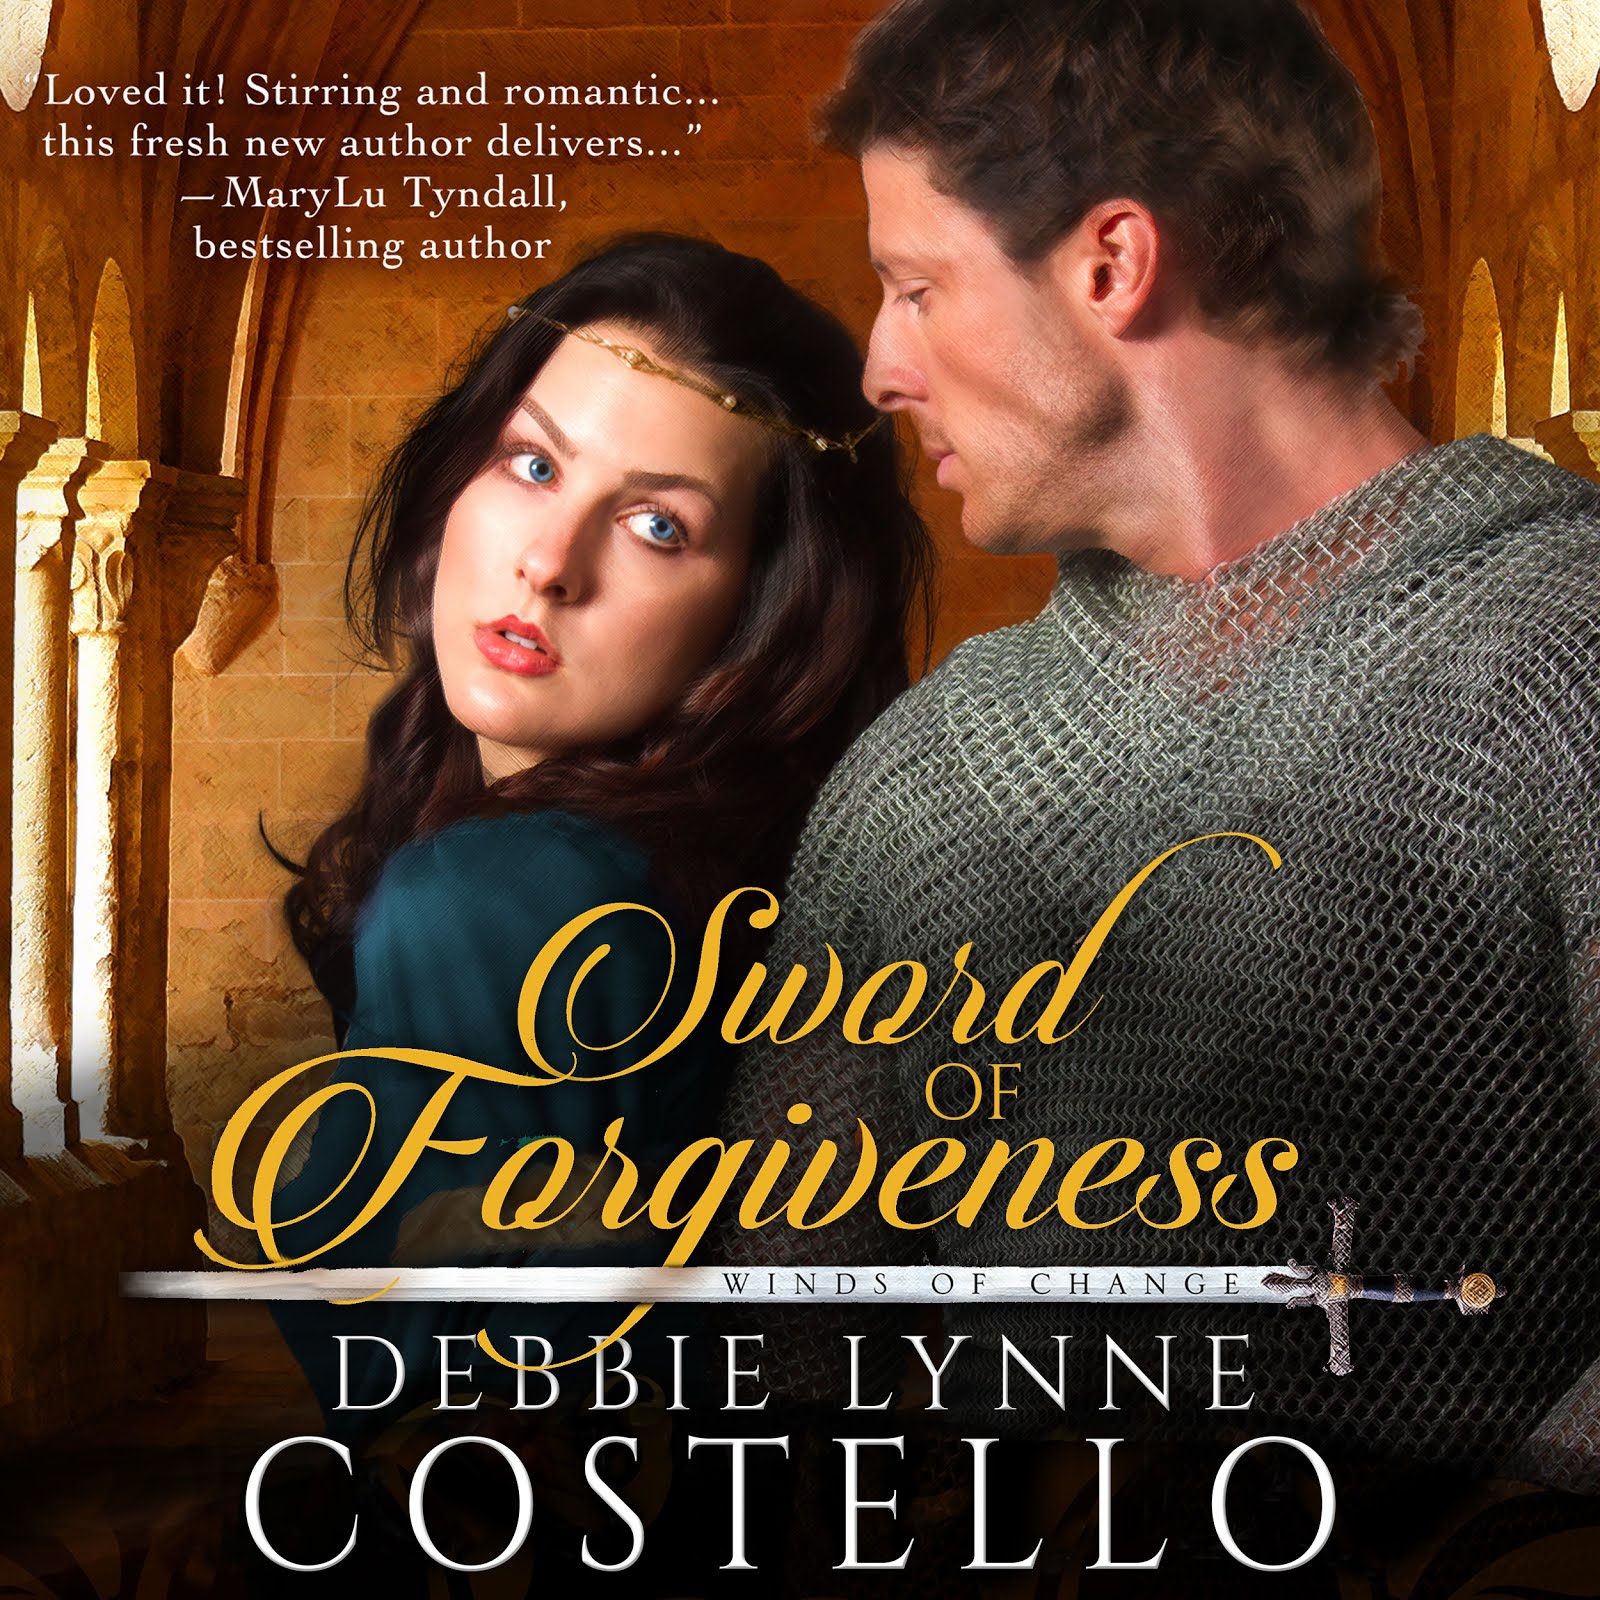 Sword of Forgiveness is now Available in Audio